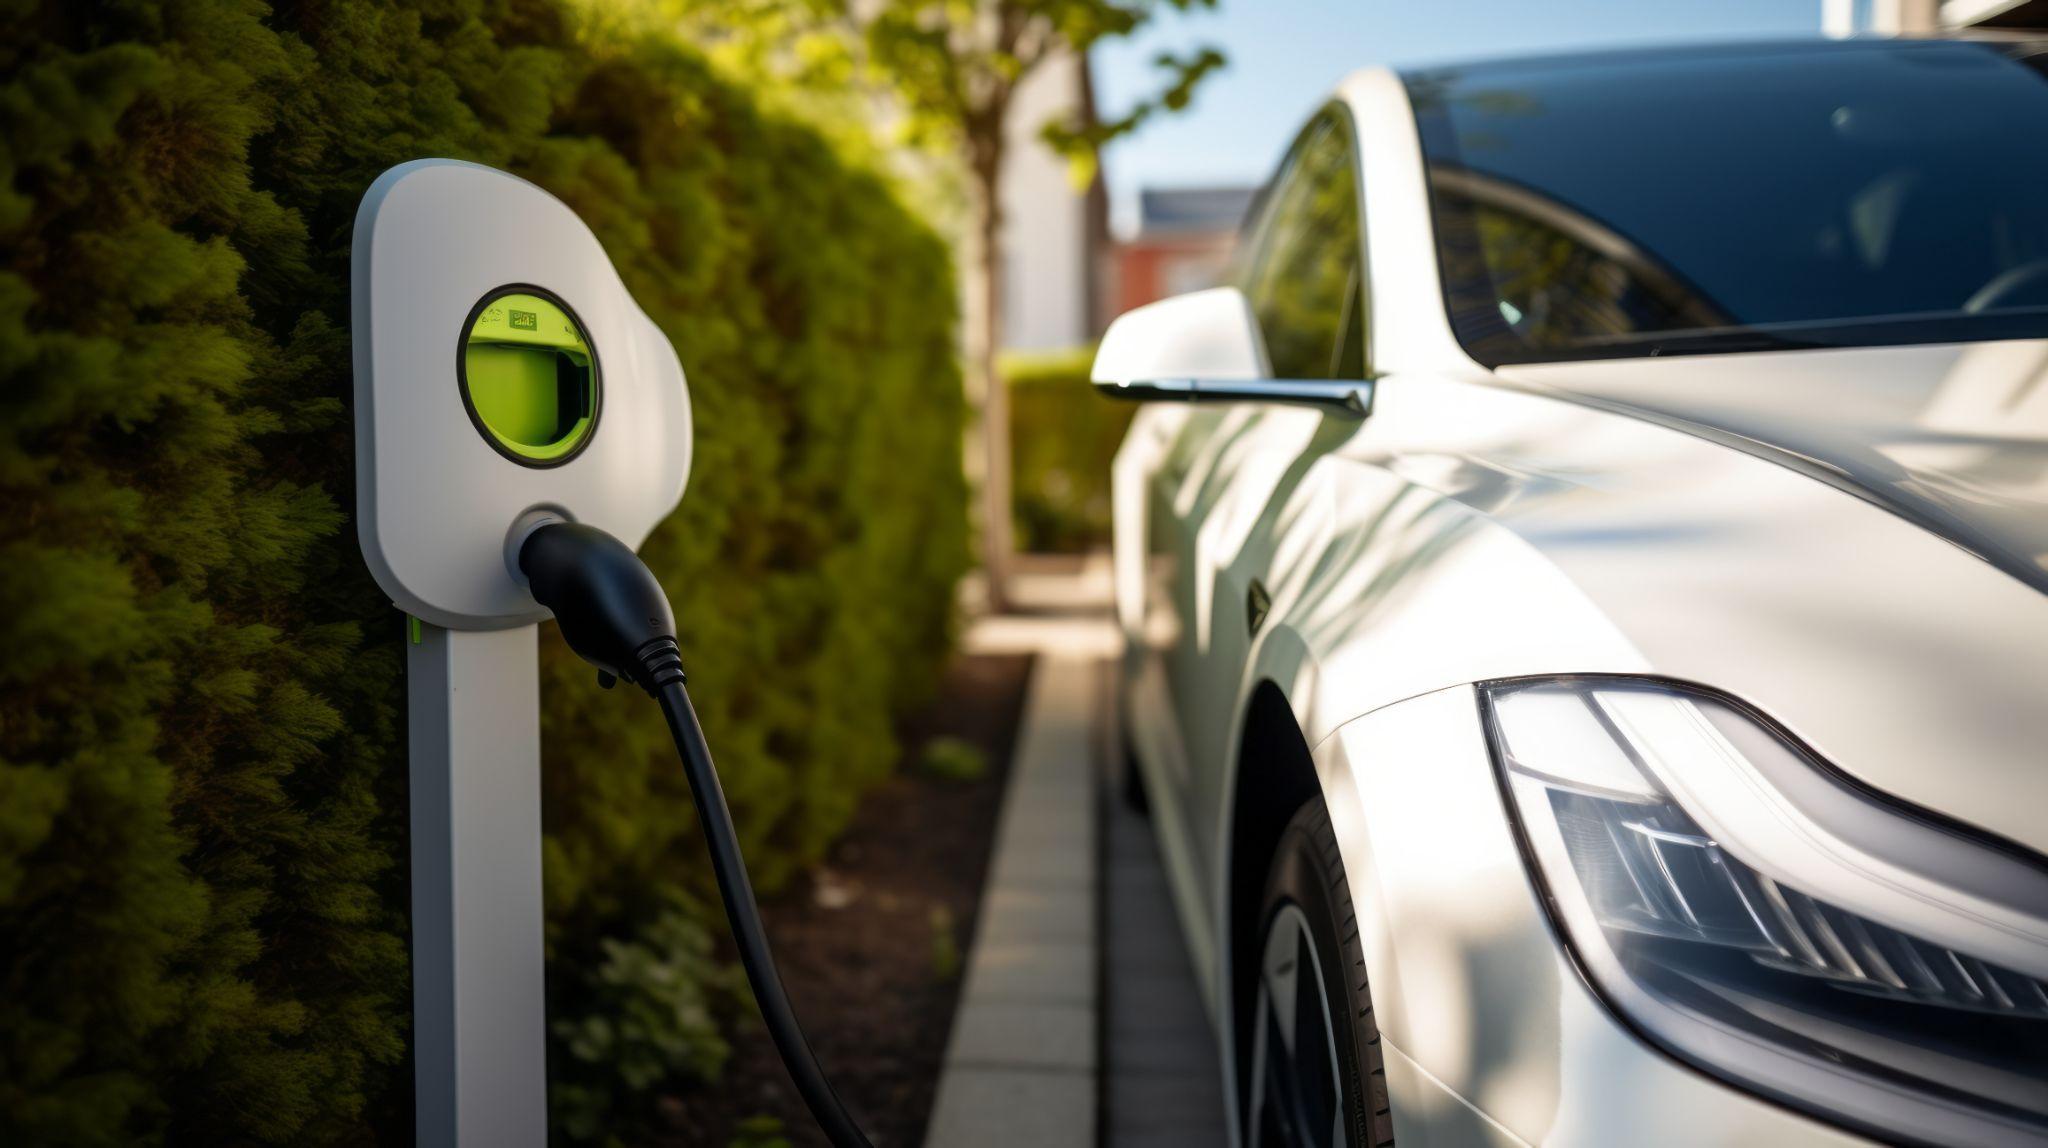 New Car Insurance Options for Electric and Hybrid Vehicle Owners